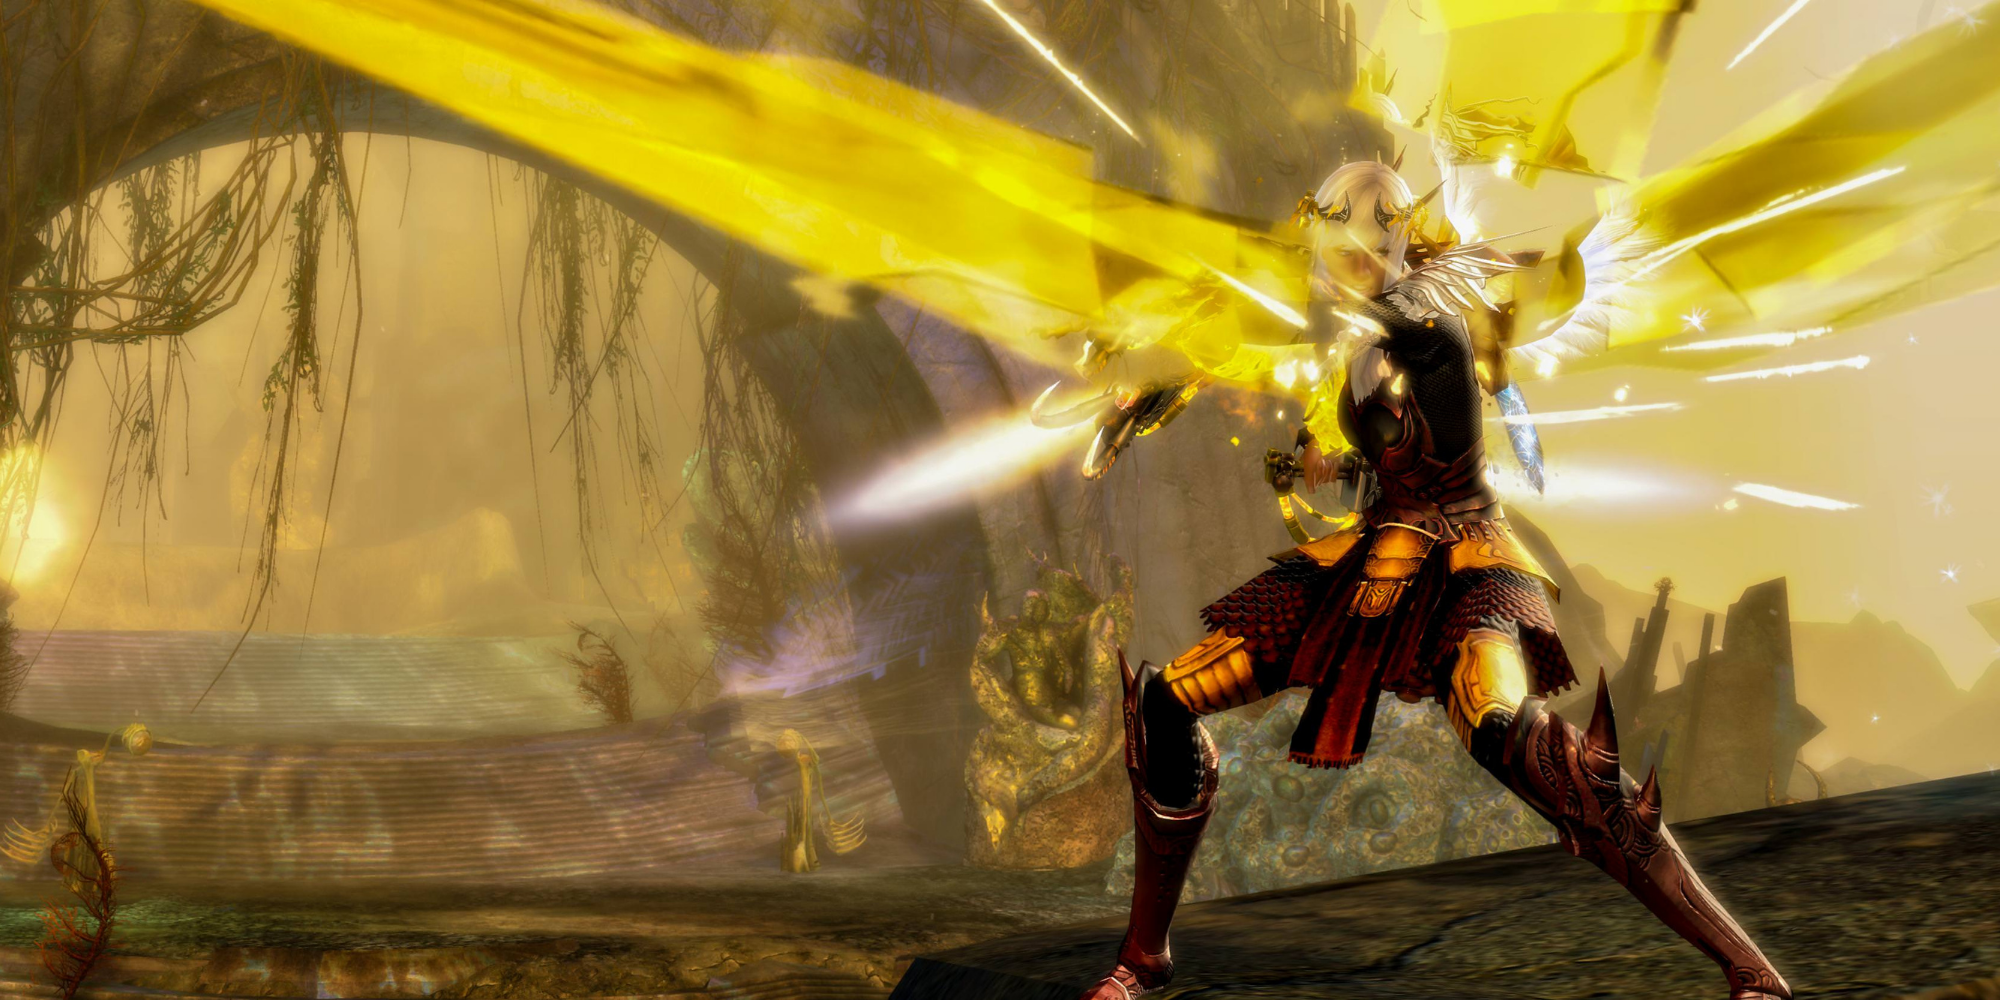 Guild Wars 2 - In-Game screenshot of Warrior in Orr using weapons